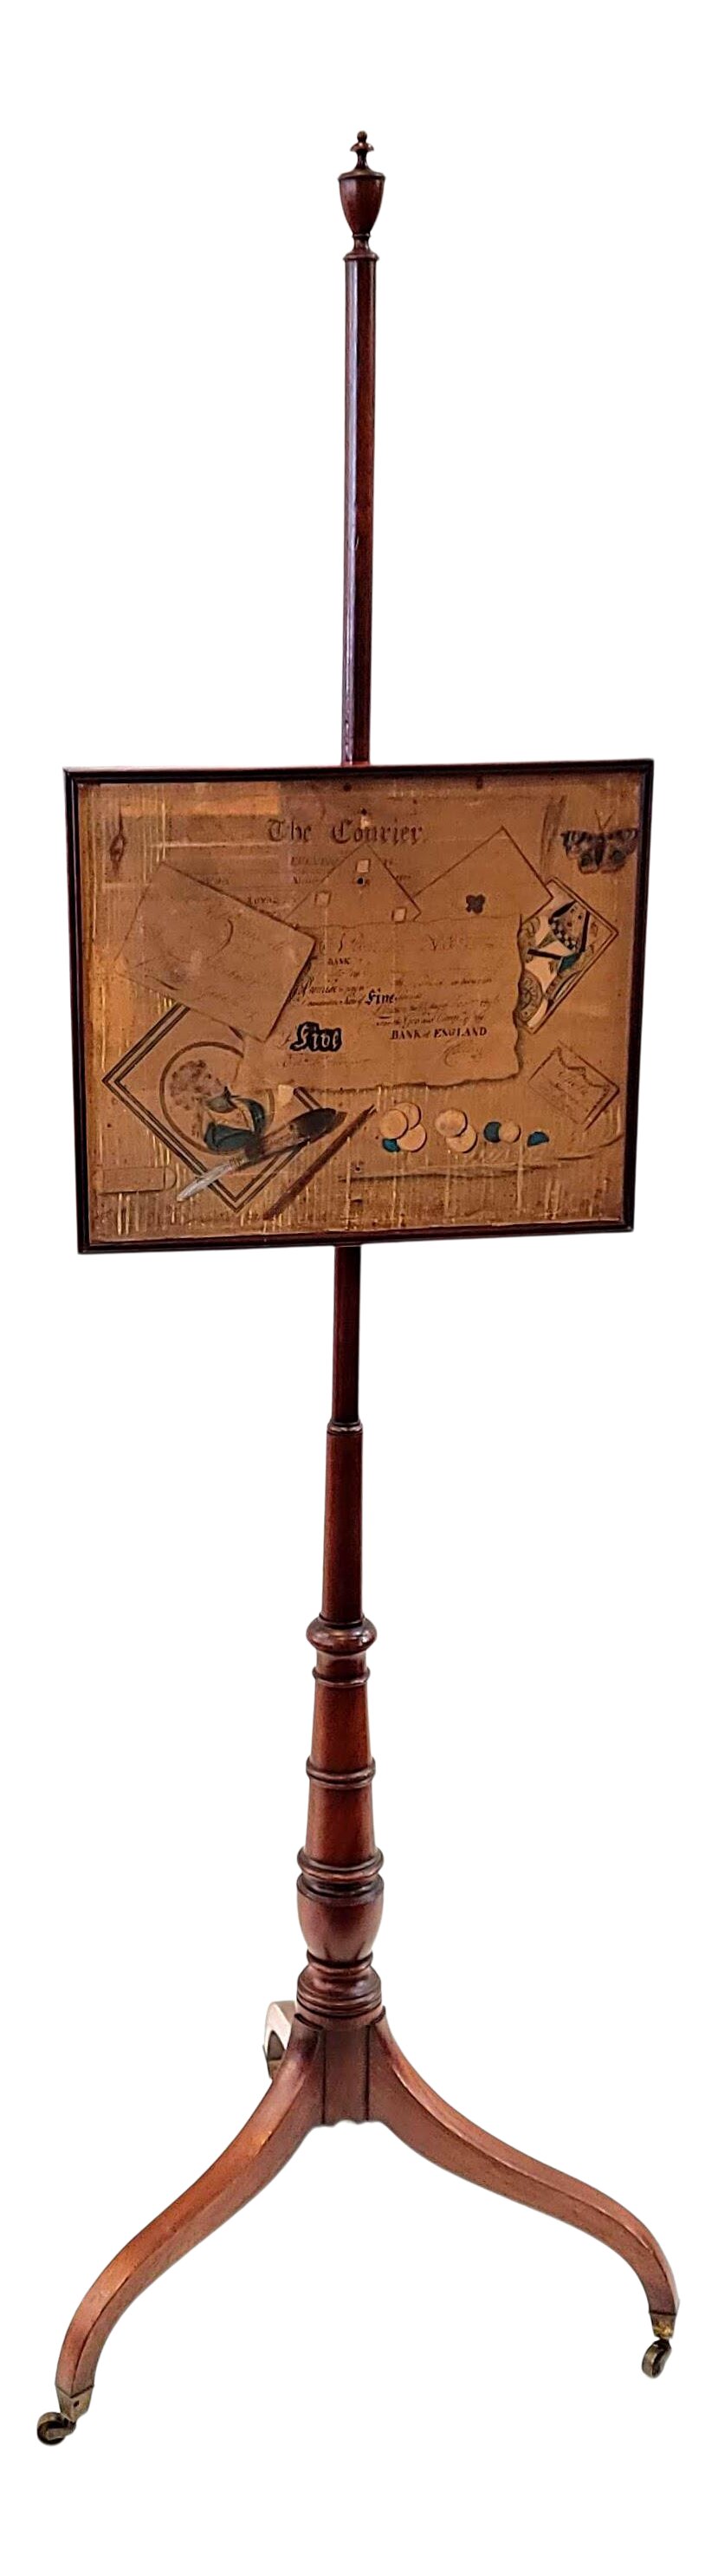 English Regency turned mahogany adjustable pole fire shield in the Georgian style of the mid-to-late-18th-century.  The pole is turned ringed mahogany with an urn finial at top.  The pole is attached to a trio of sabre legs ending in squared brass caps and casters.  The banner shield is a rectangular mahogany wood frame with a glass front housing original ink, watercolor, and pastel gambling art. 